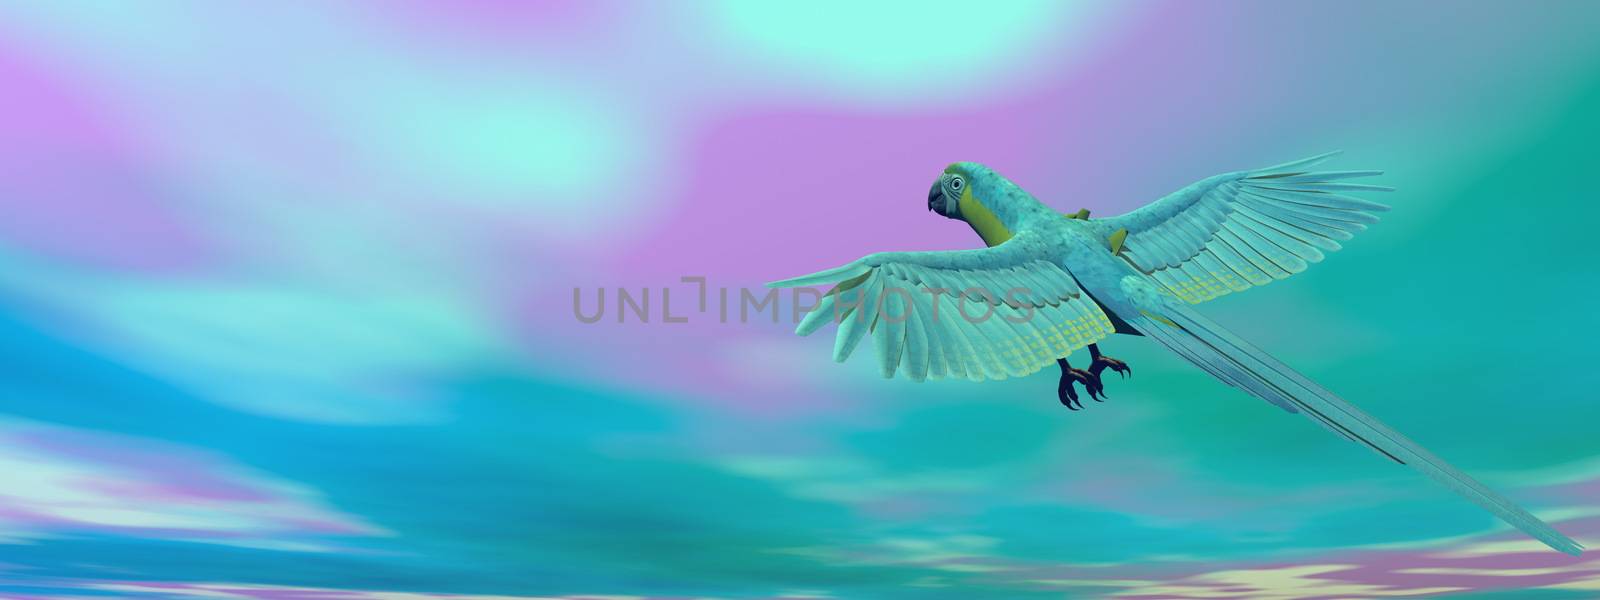 Military macaw, parrot, flying - 3D render by Elenaphotos21